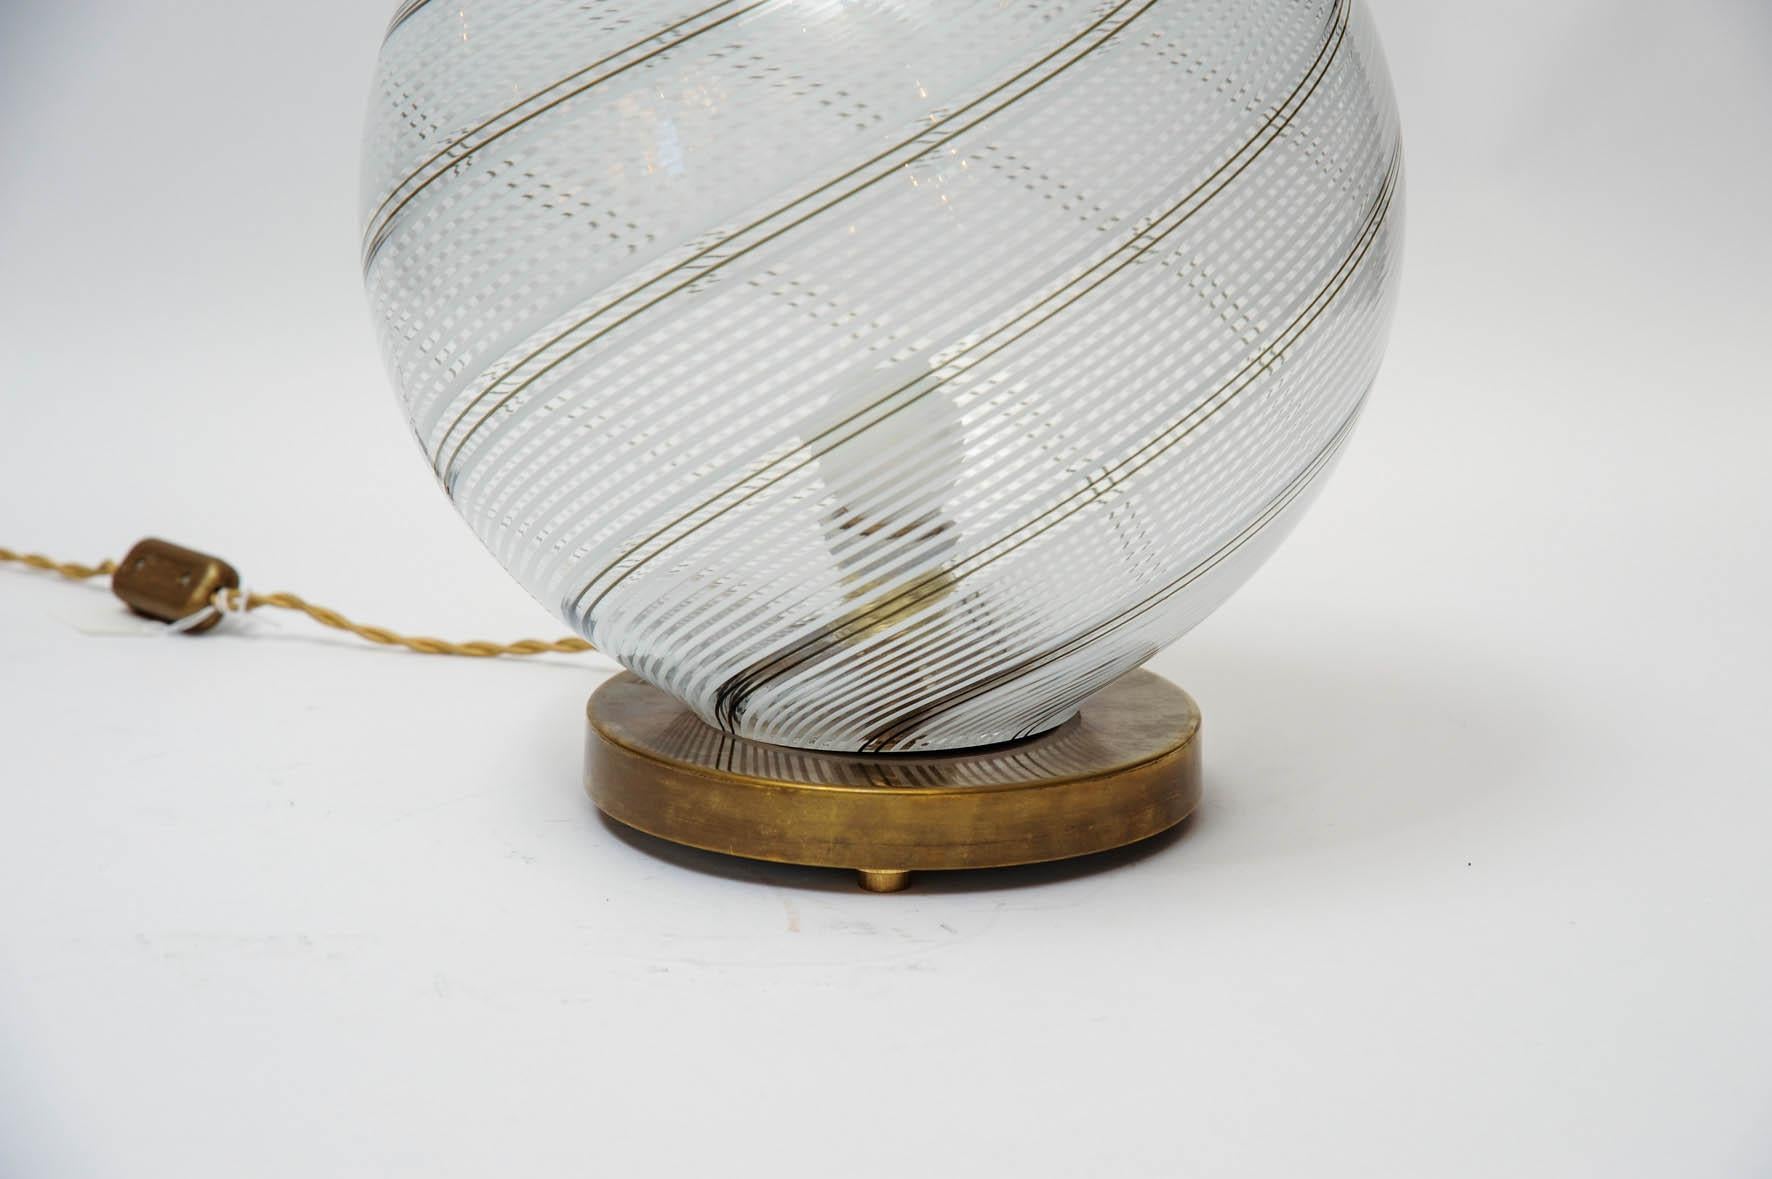 Table lamp made of a patinated brass circular foot with original stamp, topped with a large Murano glass globes with the typical Venini swirl stripes.